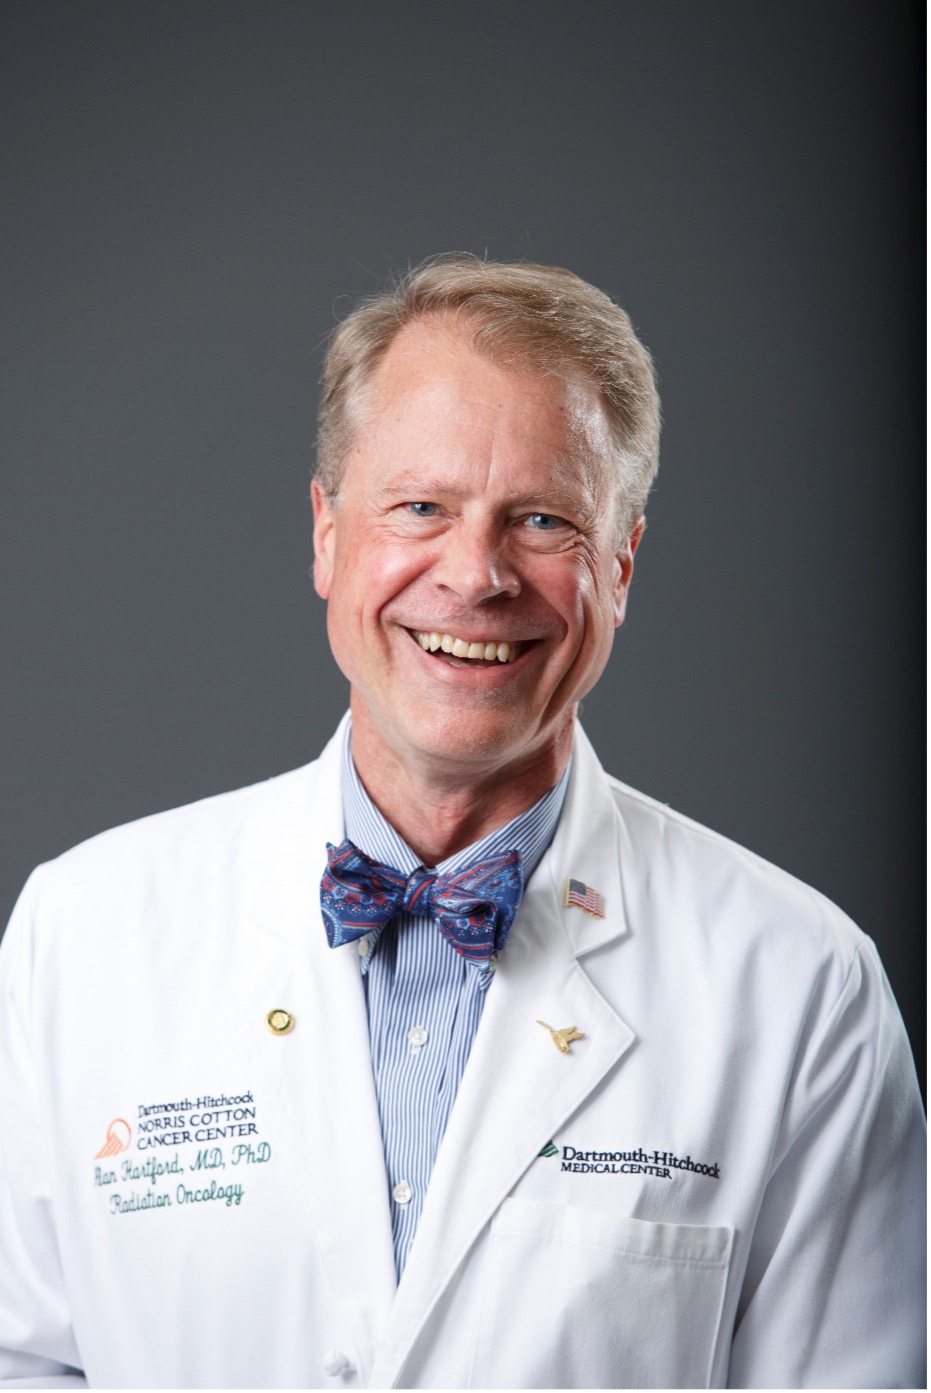 Dr. Alan Hartford Selected to Be Featured in IAOTP’s Top 25 Global Impact Leaders Publication